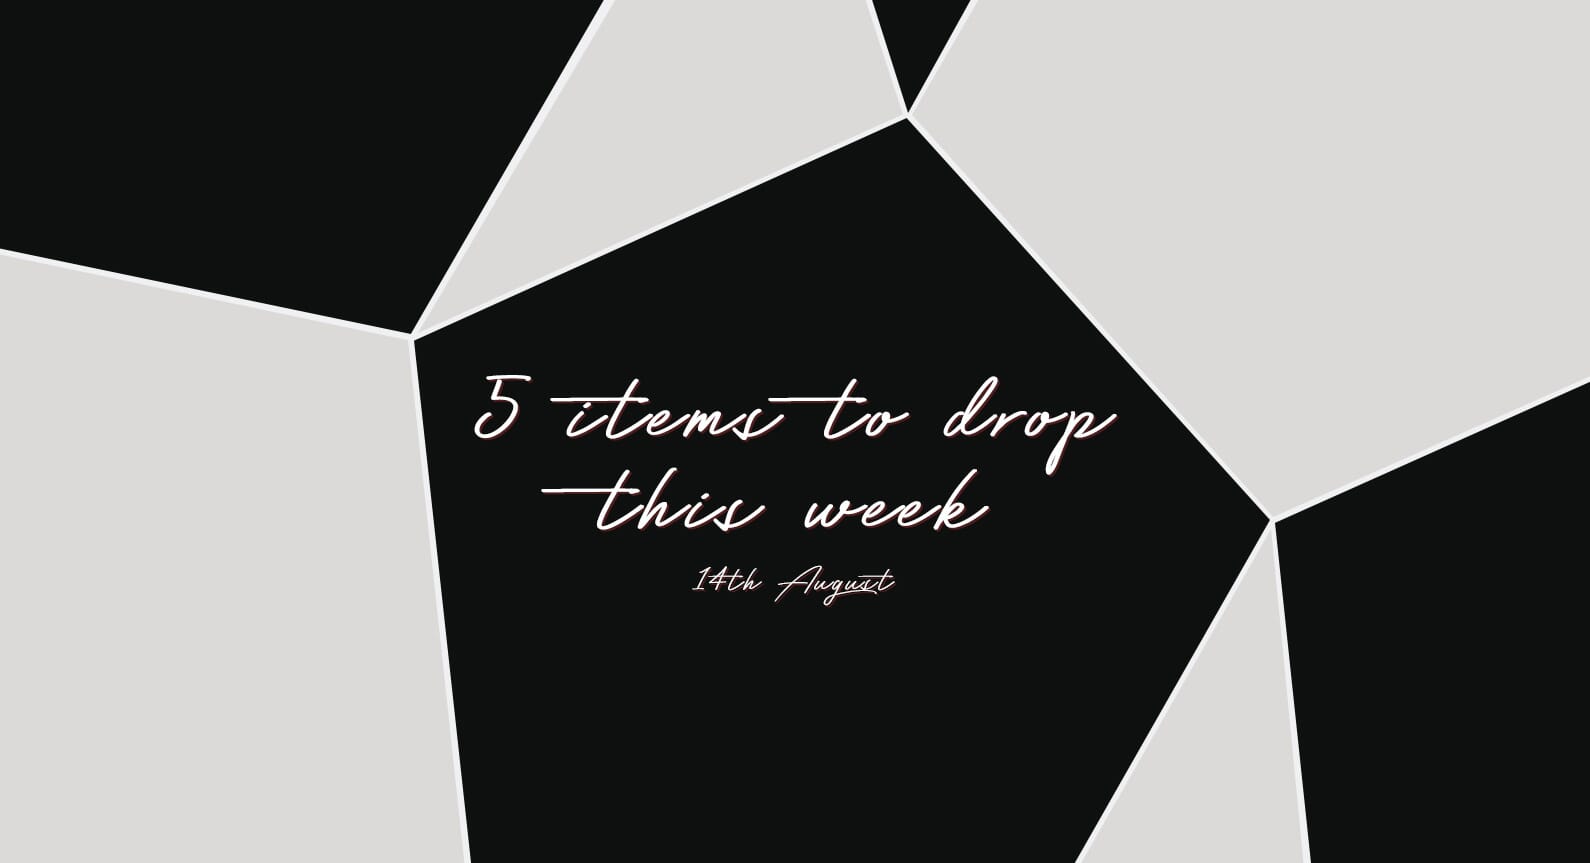 The Top 5 Items To Drop This Week